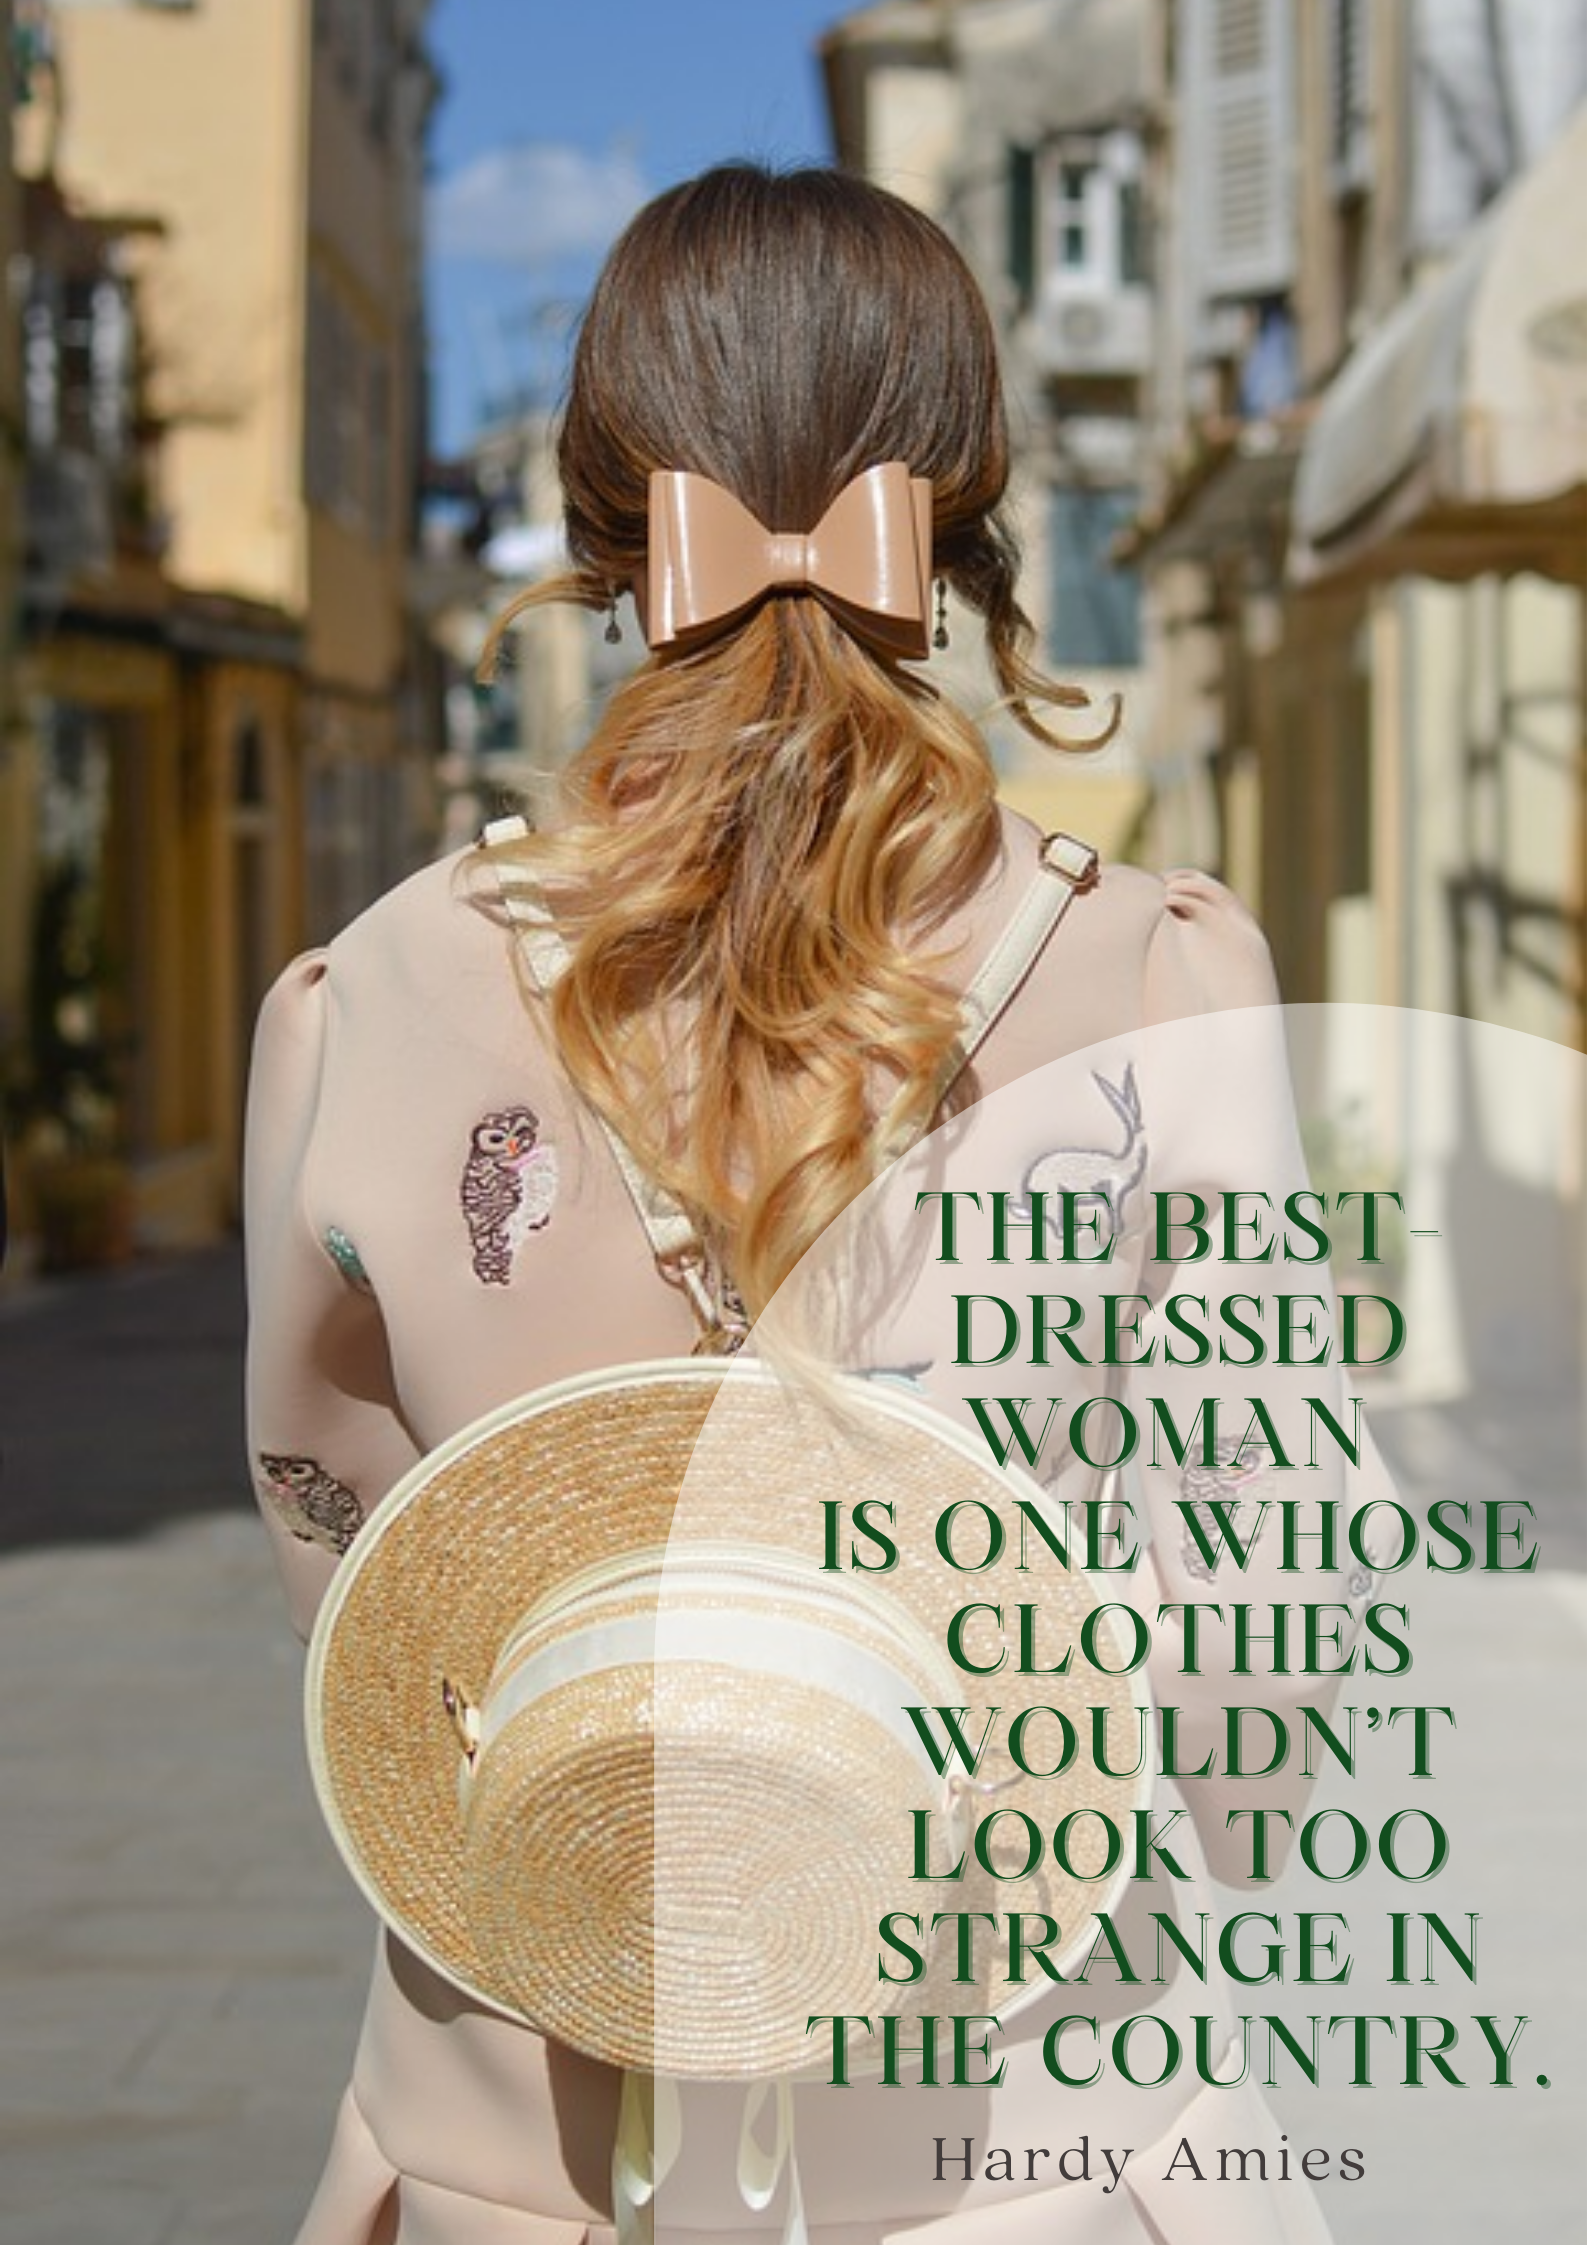 An image shows the back of a women's head, her dirty blonde hair tied back with a bow clip. She wears a straw sunhat. Text on the image says, "The best-dressed woman is one whose clothes wouldn’t look too strange in the country. – Hardy Amies"